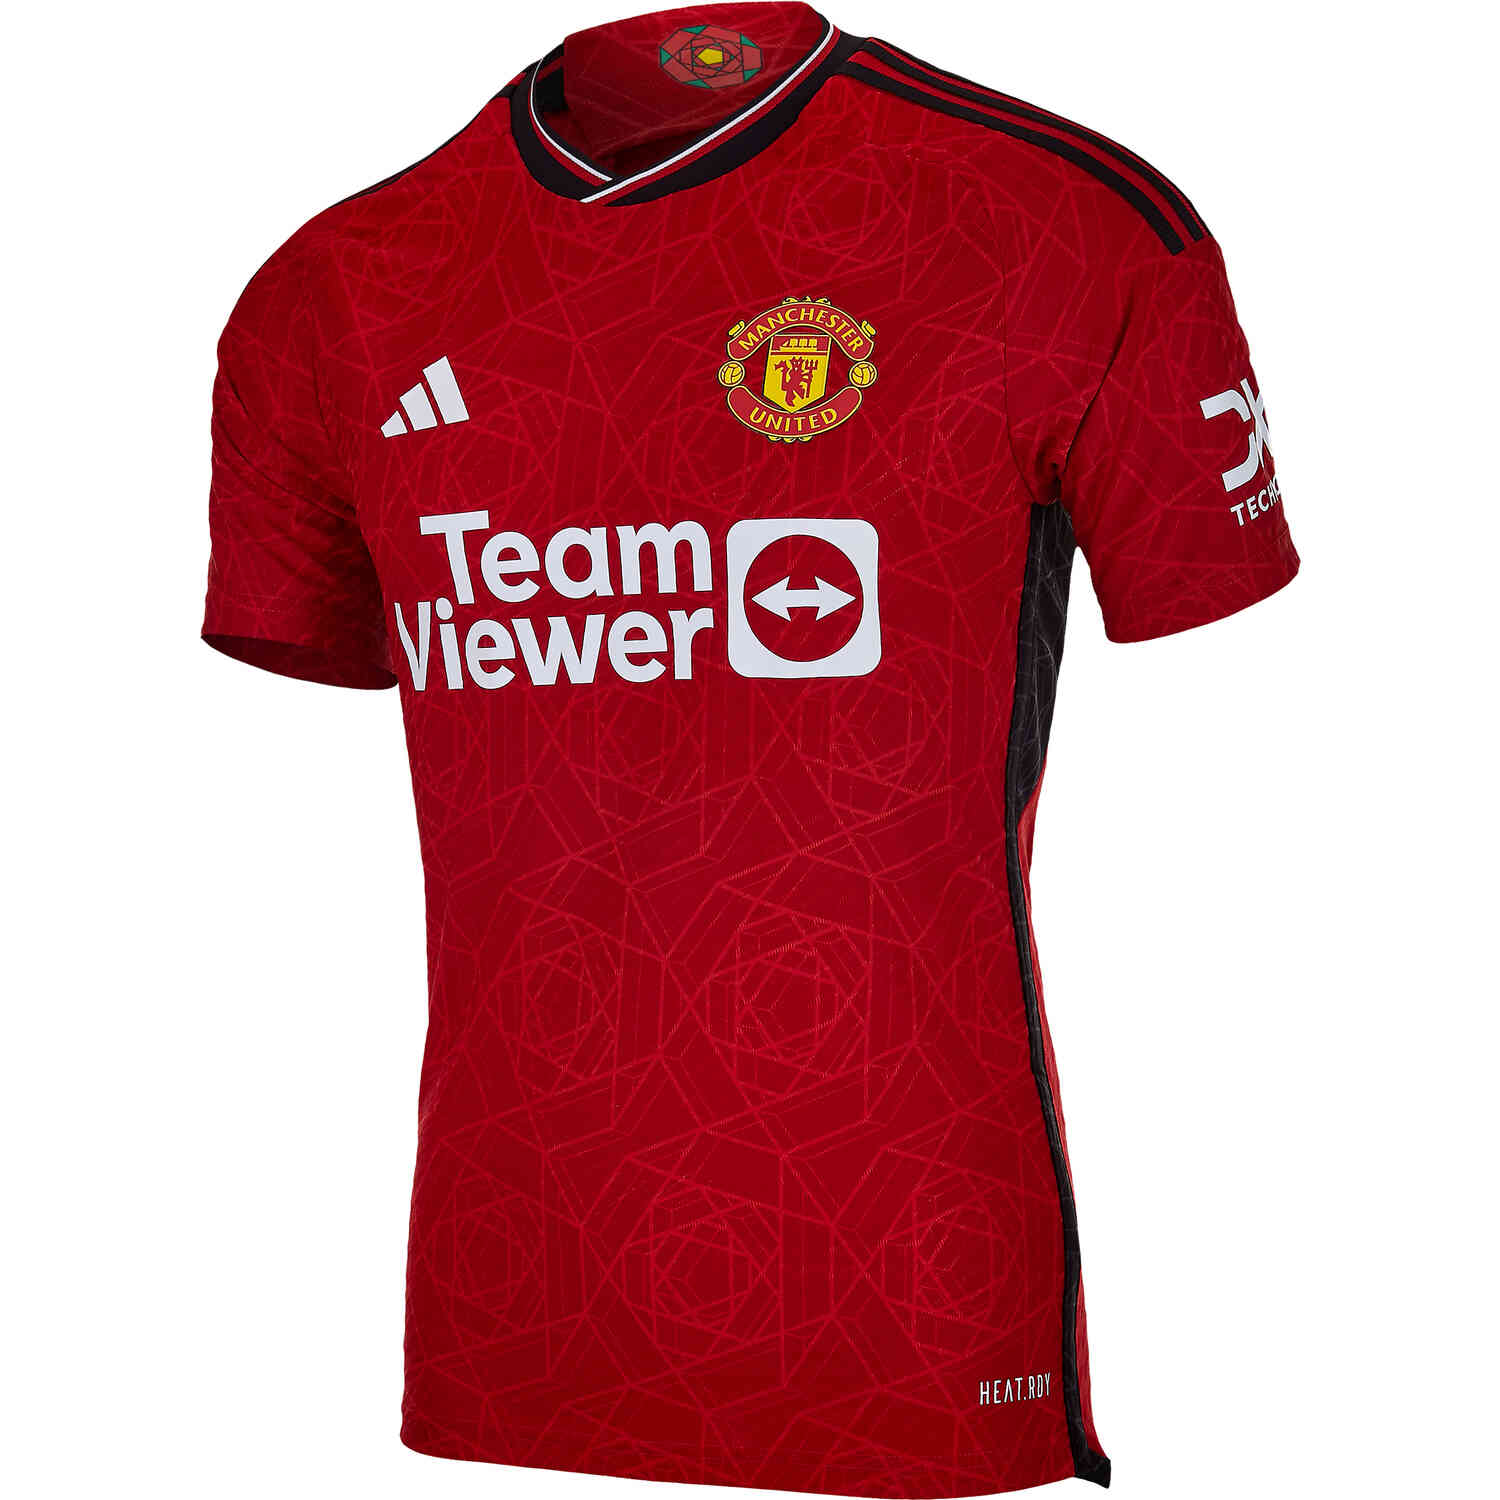 2019/20 adidas Manchester United Home Jersey - Soccer Master